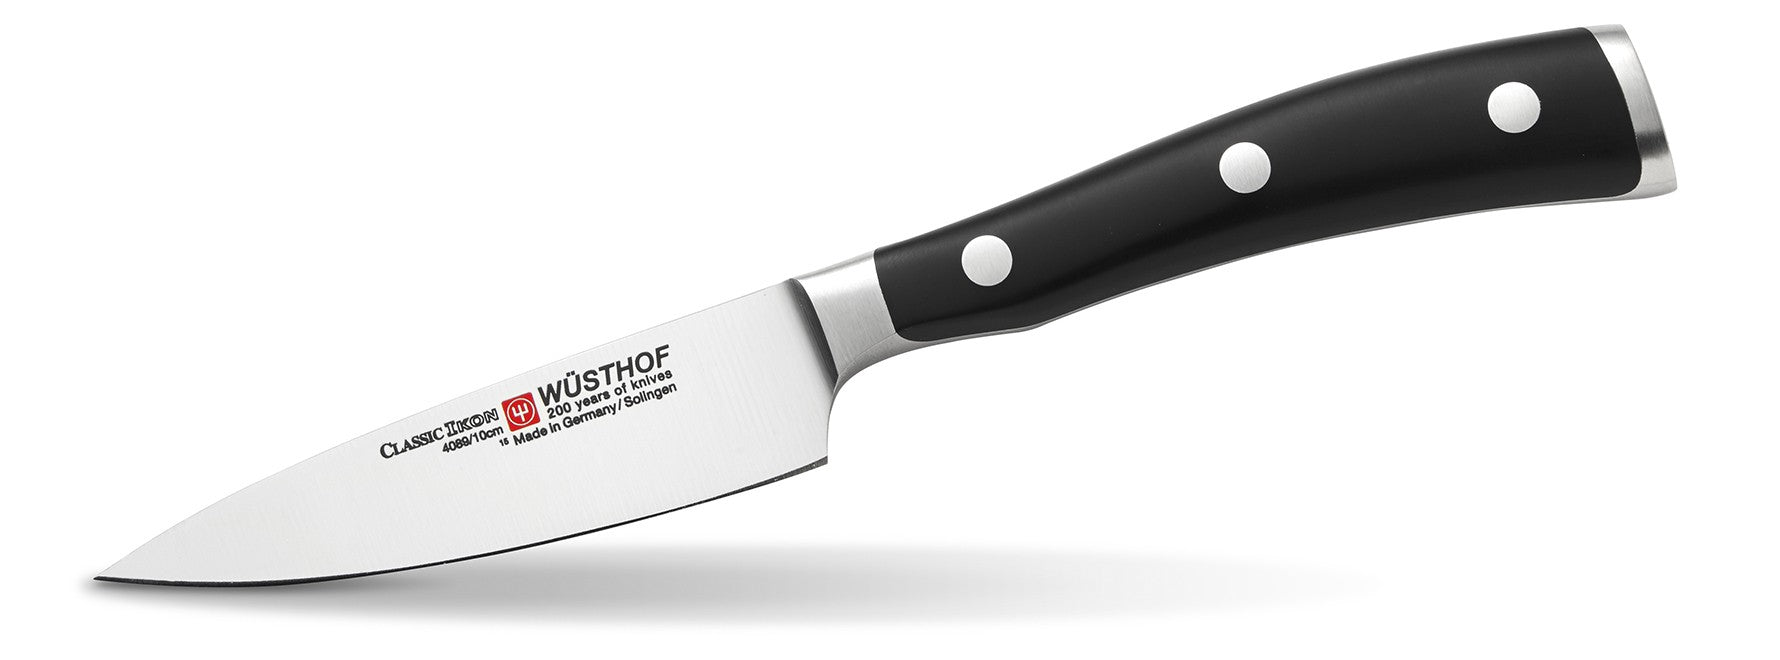 Wusthof Classic Ikon 4 Inch Extra Wide Paring Knife